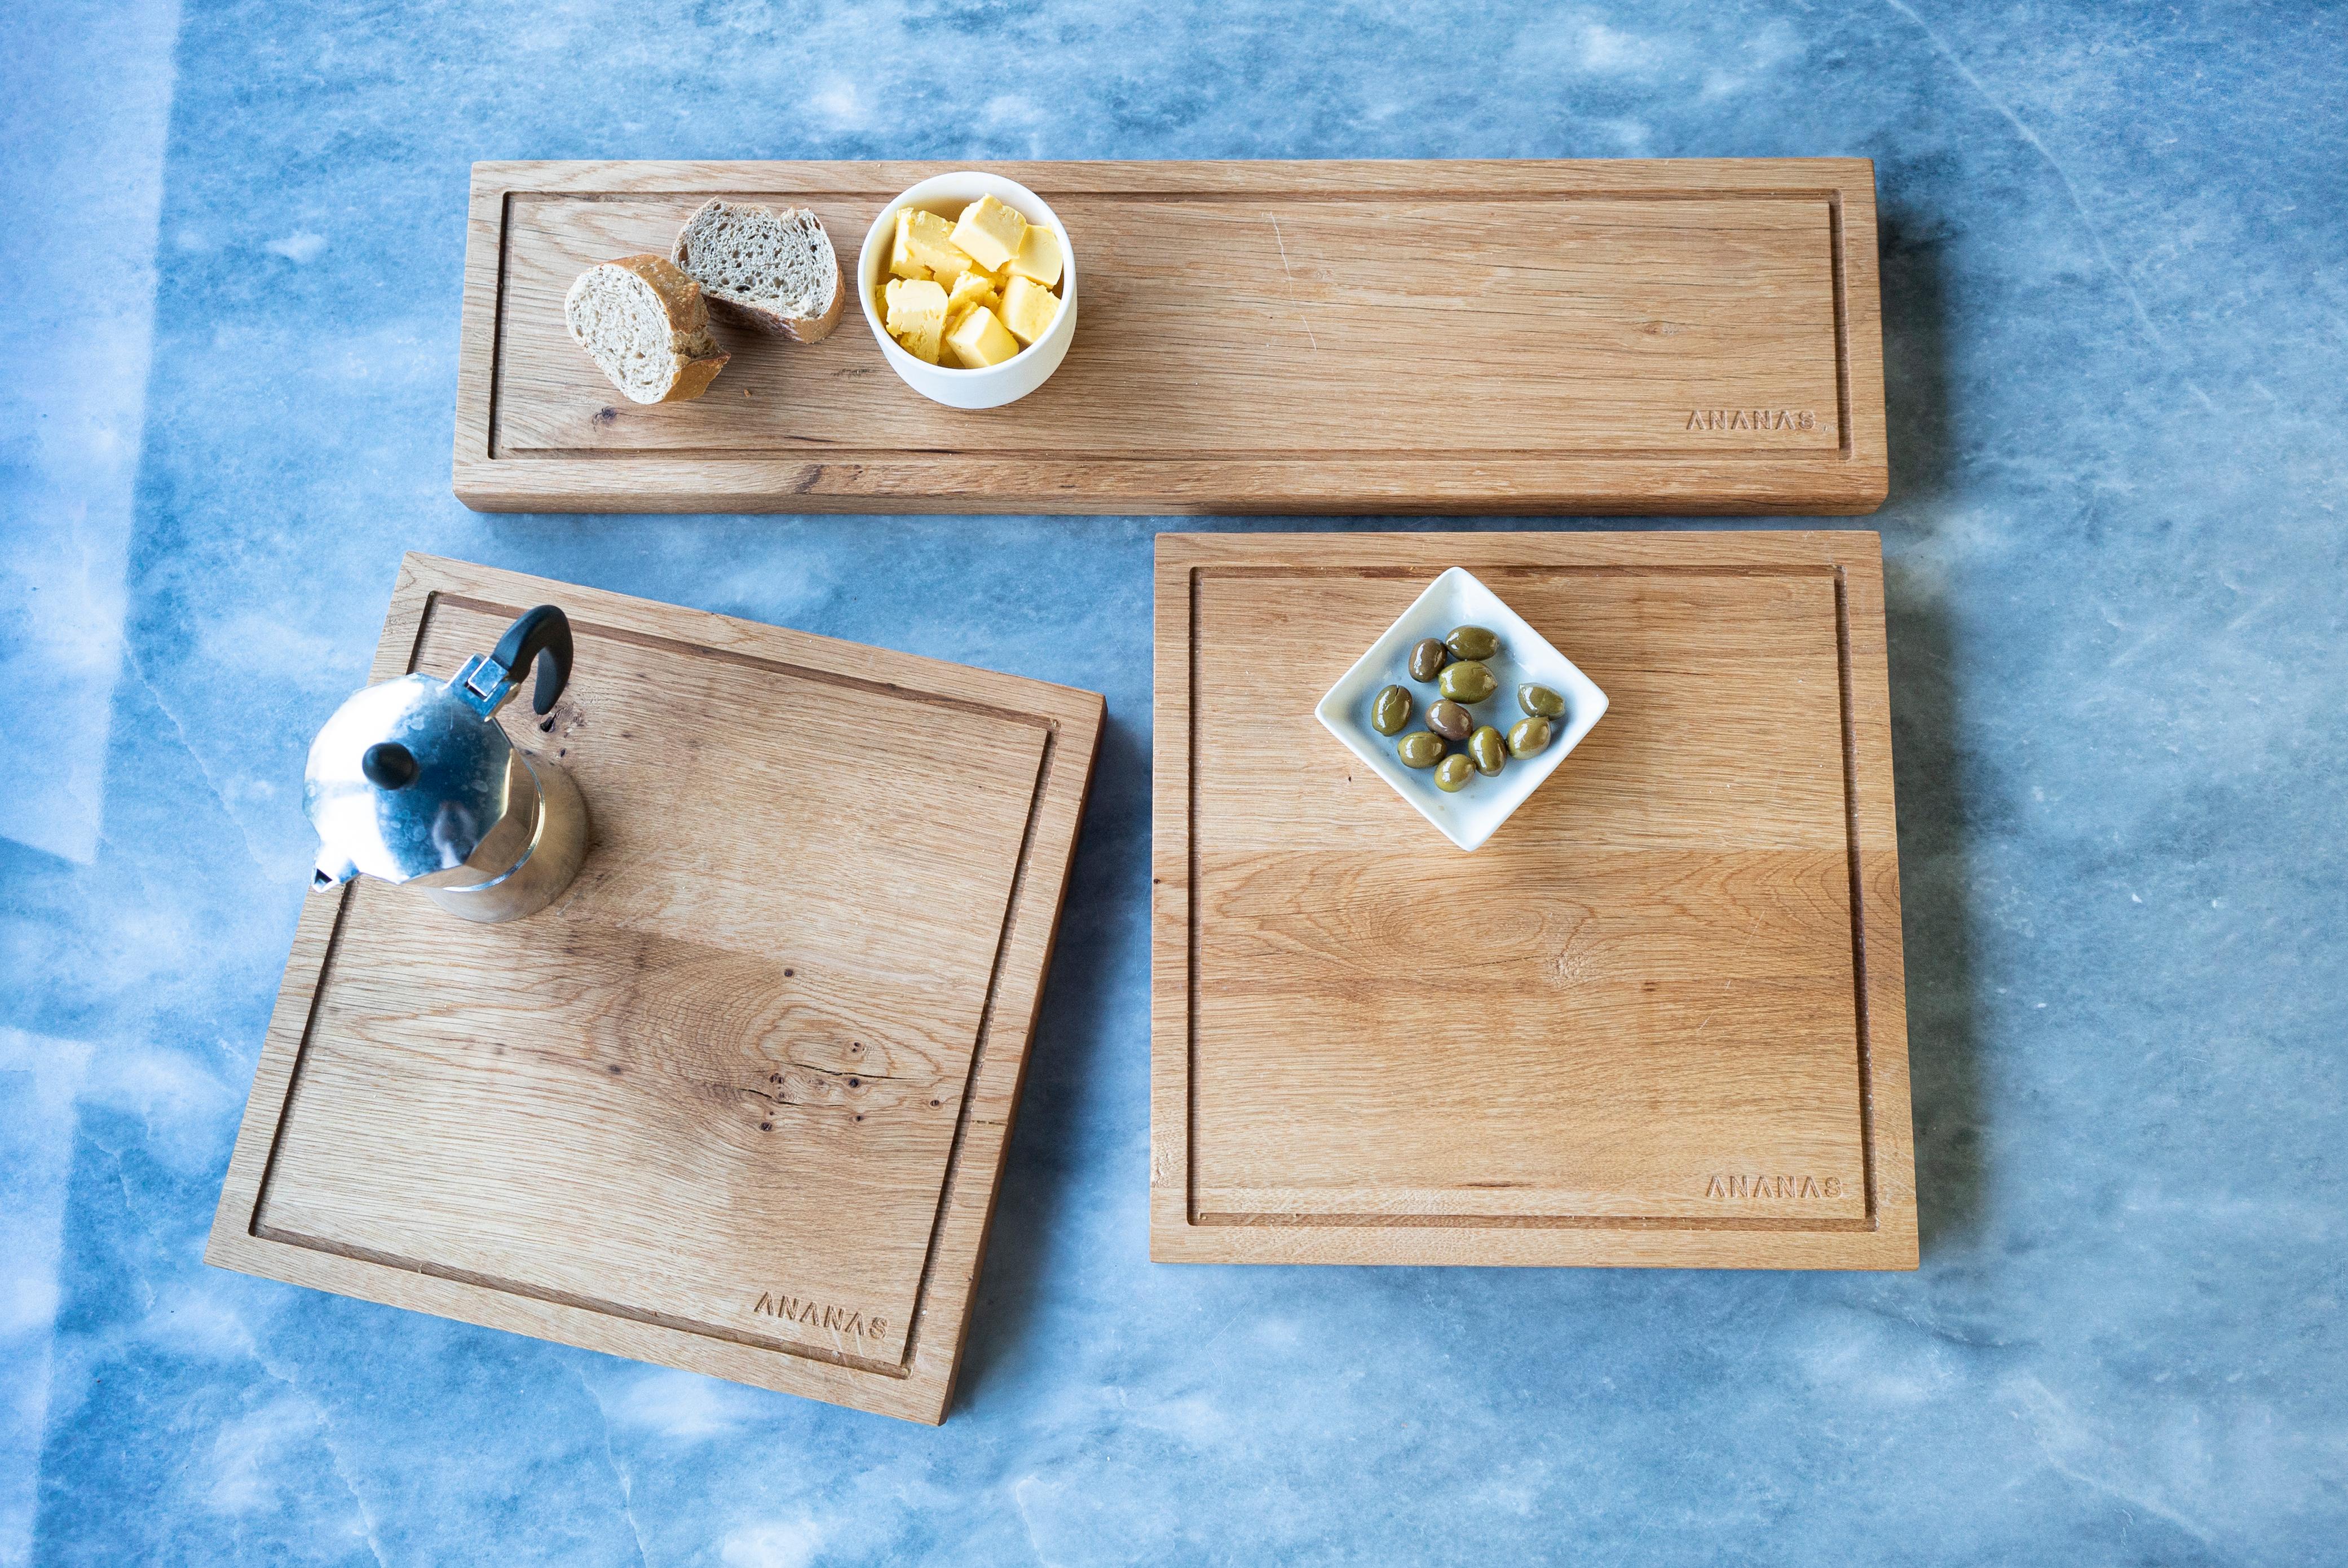 Suitable for the use of two people, serving board. It is produced from the solid oak tree. It collects the juices of food on the canals of its edges. Each tree is different in pattern, texture, color tone, and vascular structure. This difference